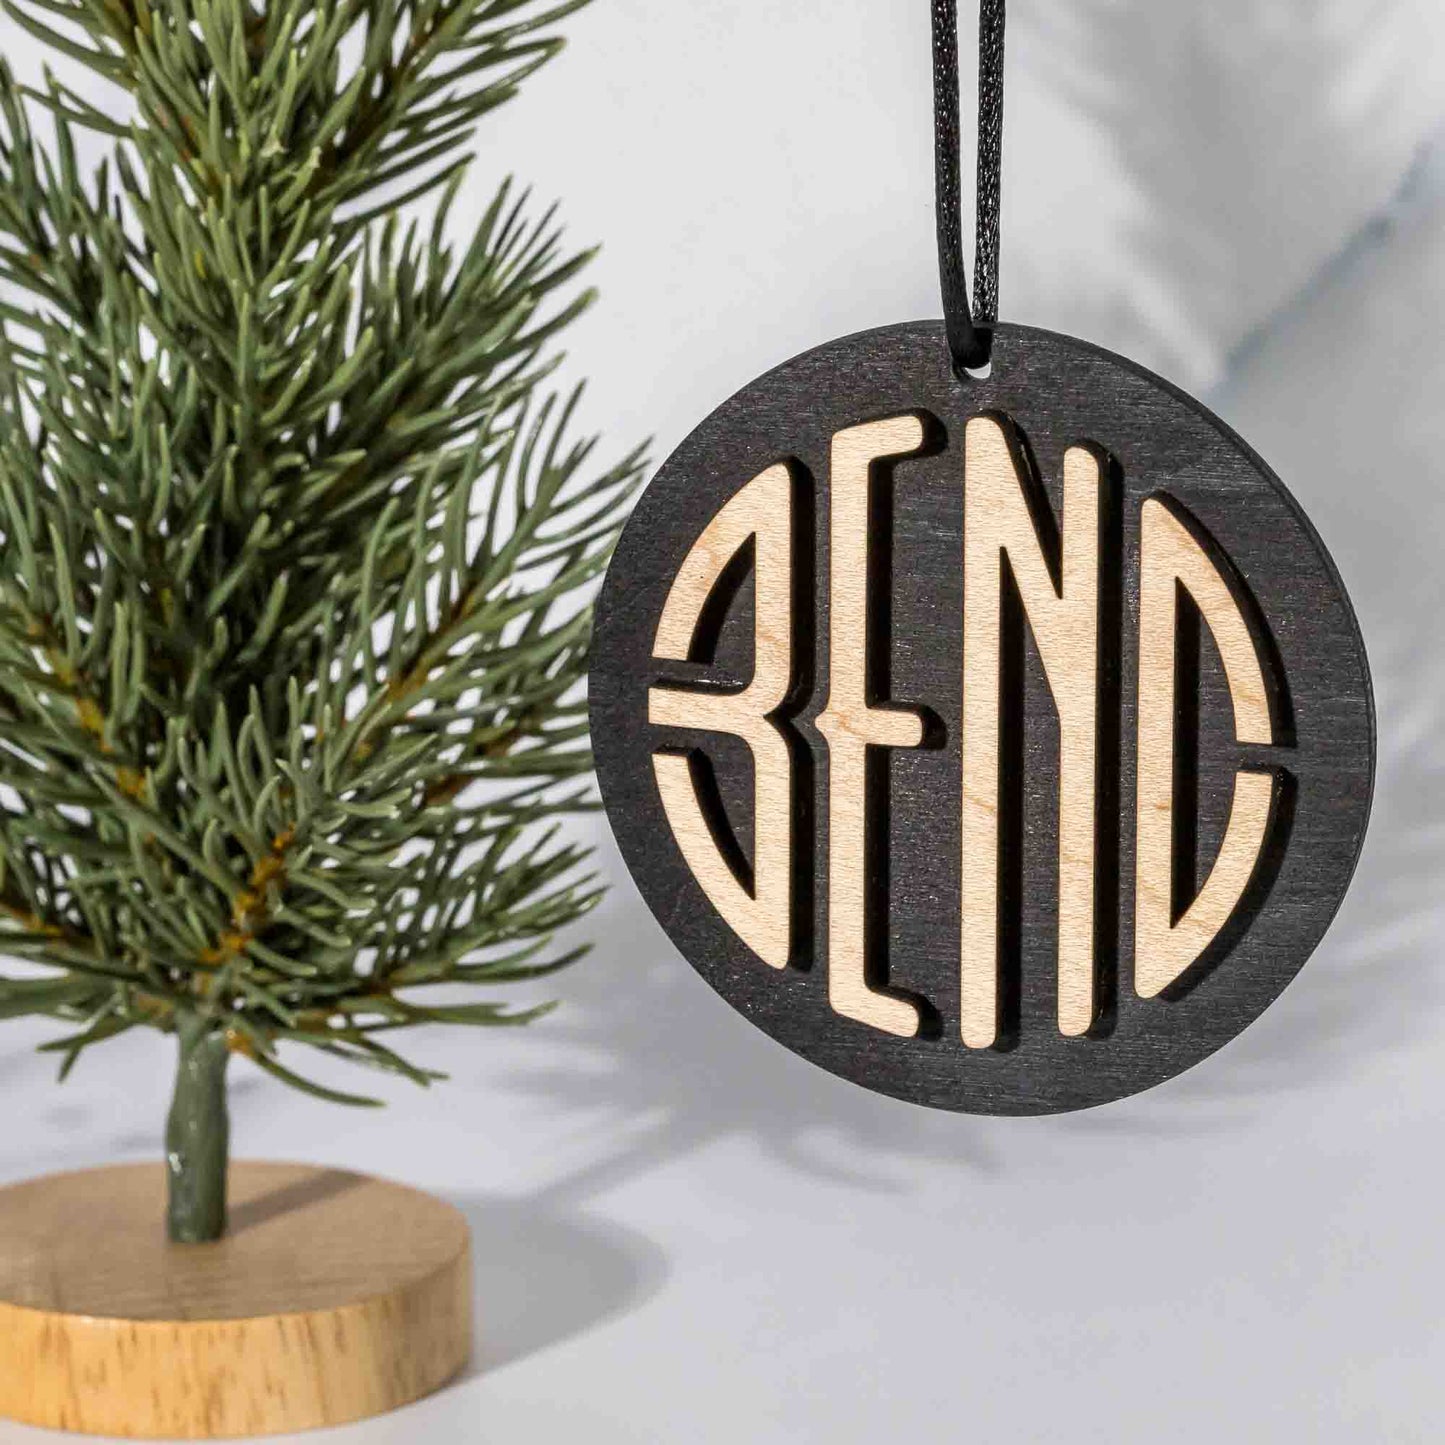 State Christmas Ornaments: Bend, Oregon (Layered) - LeeMo Designs